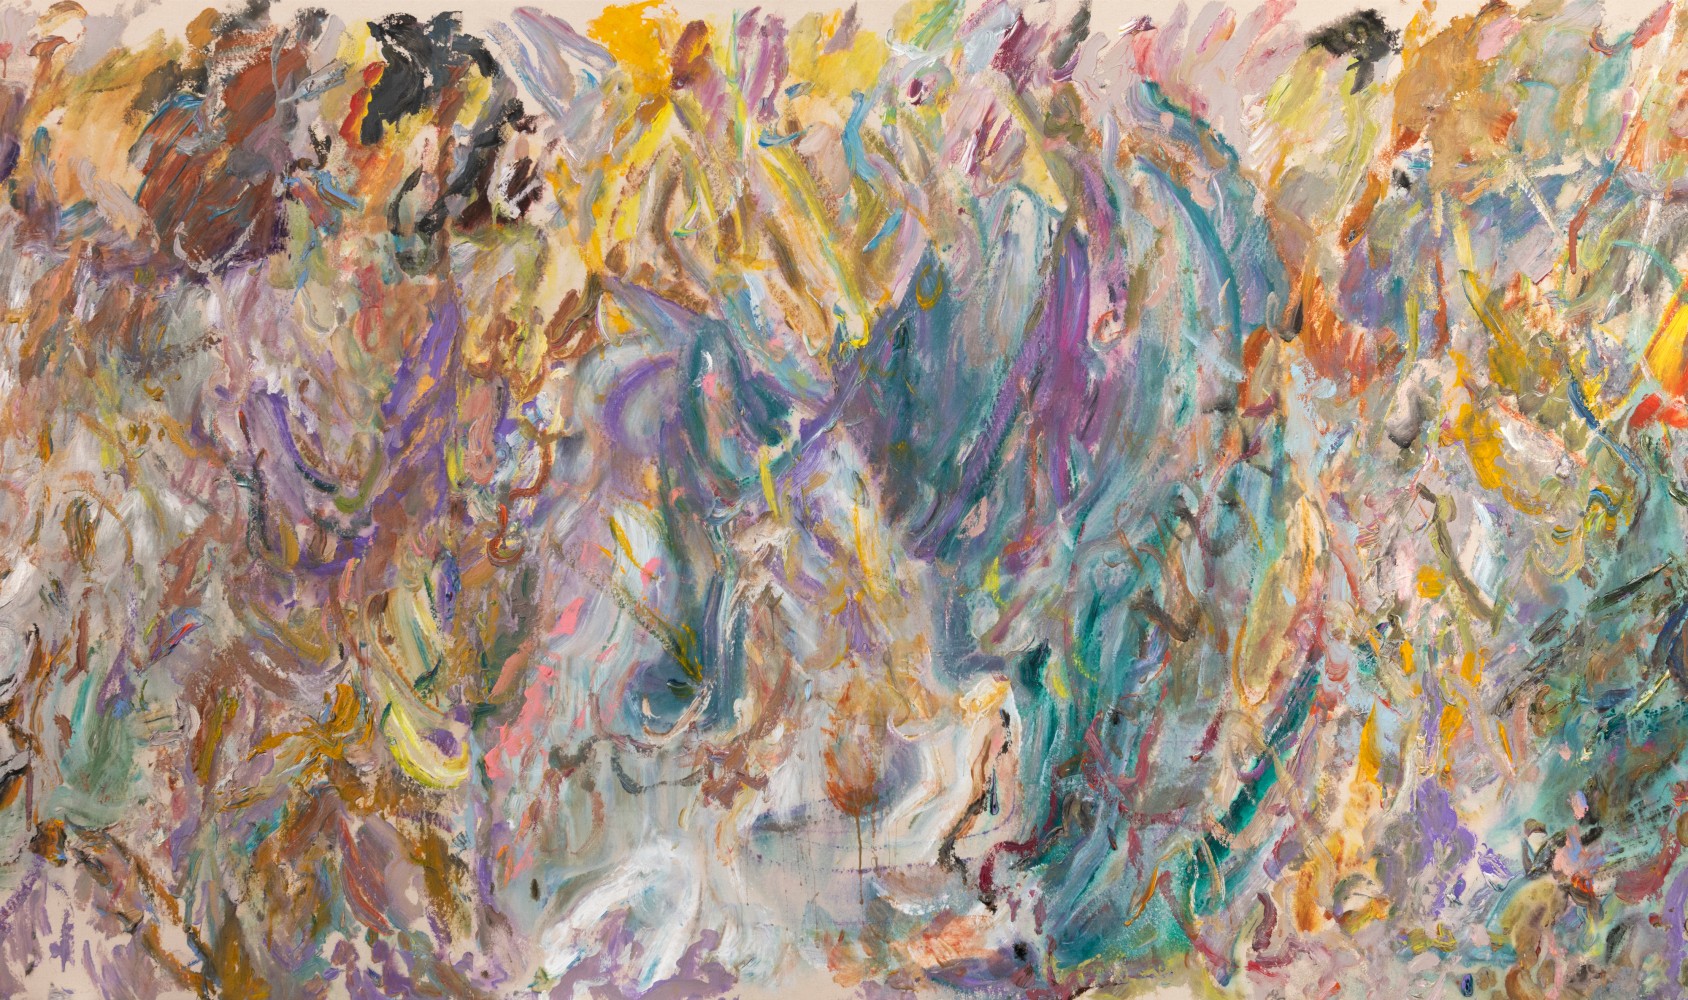 LARRY POONS (American b. 1937)

Scythe Raphine

2021

Acrylic on canvas

56 1/2 x 96 inches

143.5 x 243.8cm